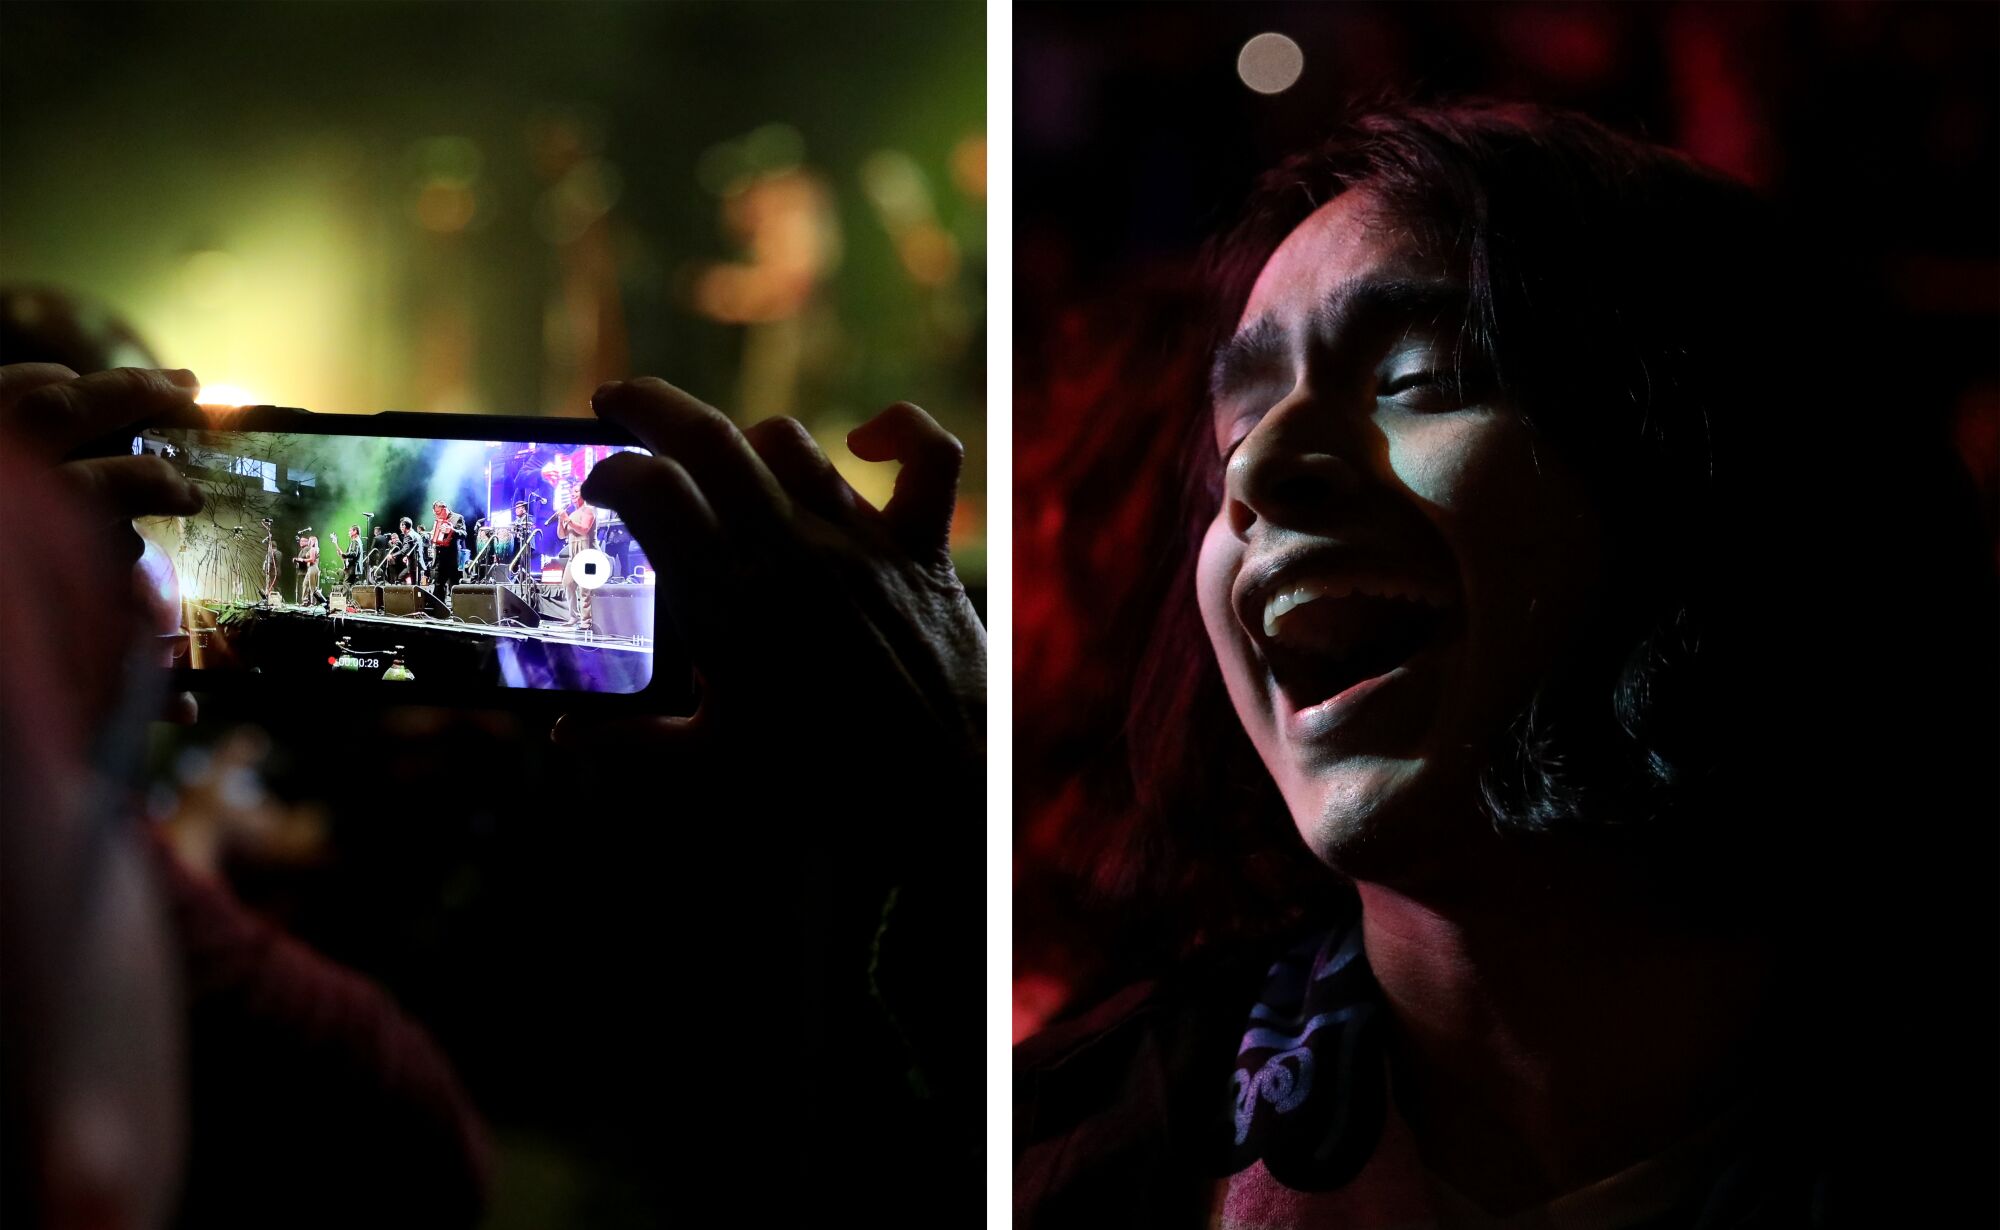 A fan, left, takes a video of Los Angeles Azules while they perform in Estero, FL. Fernando Zamora, 18, right, sings.